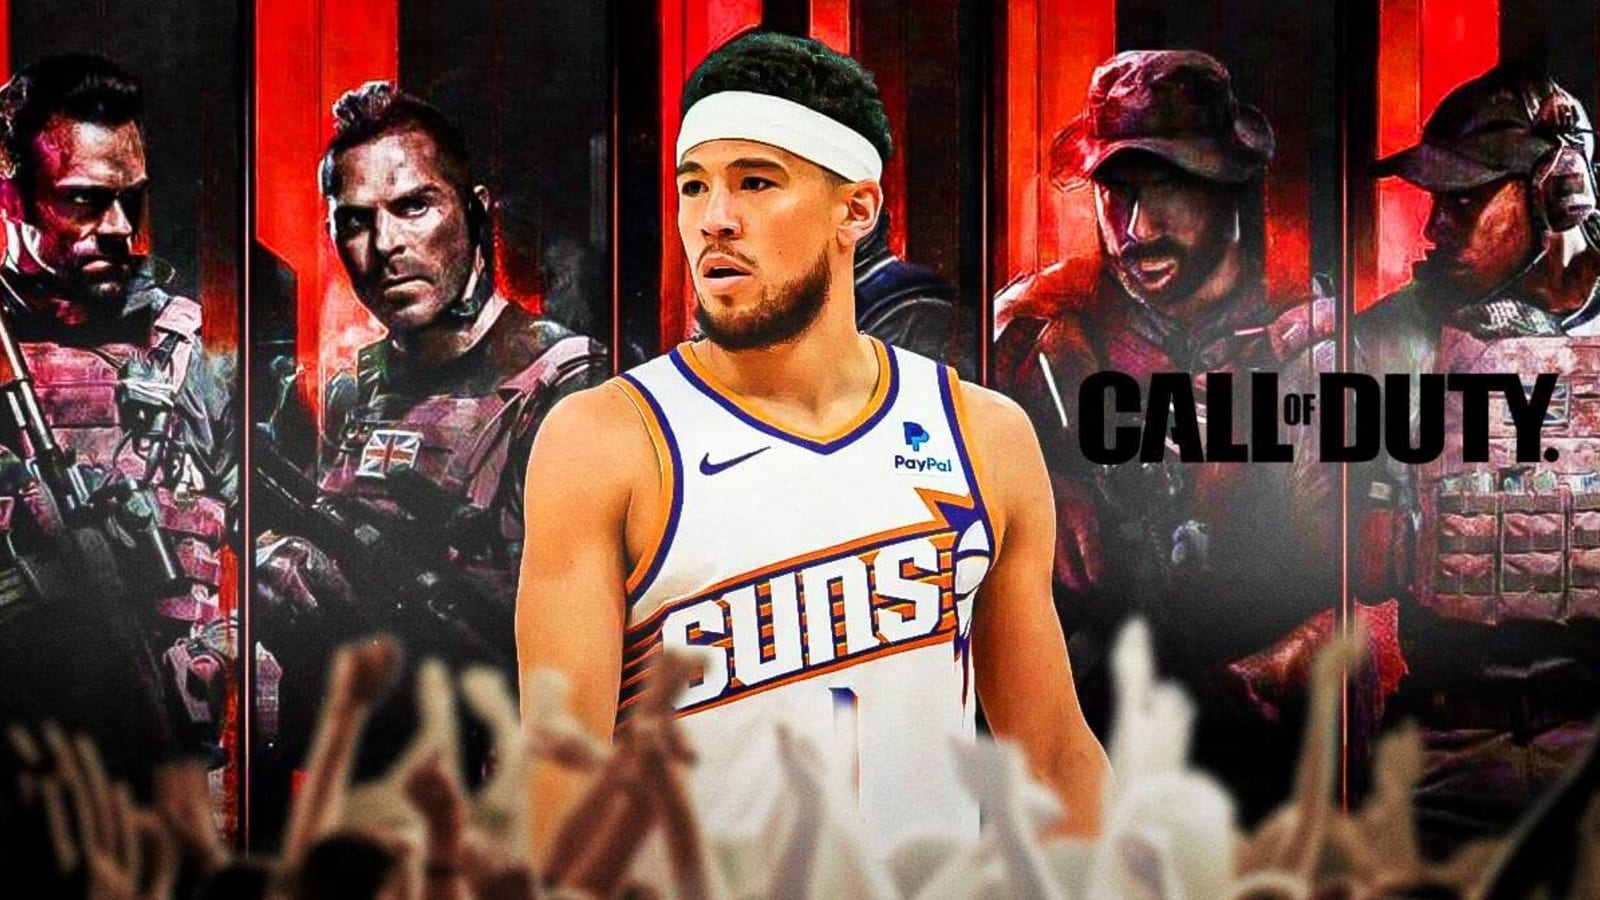 Call Of Duty’s Update Brings Suns’ Star Devin Booker